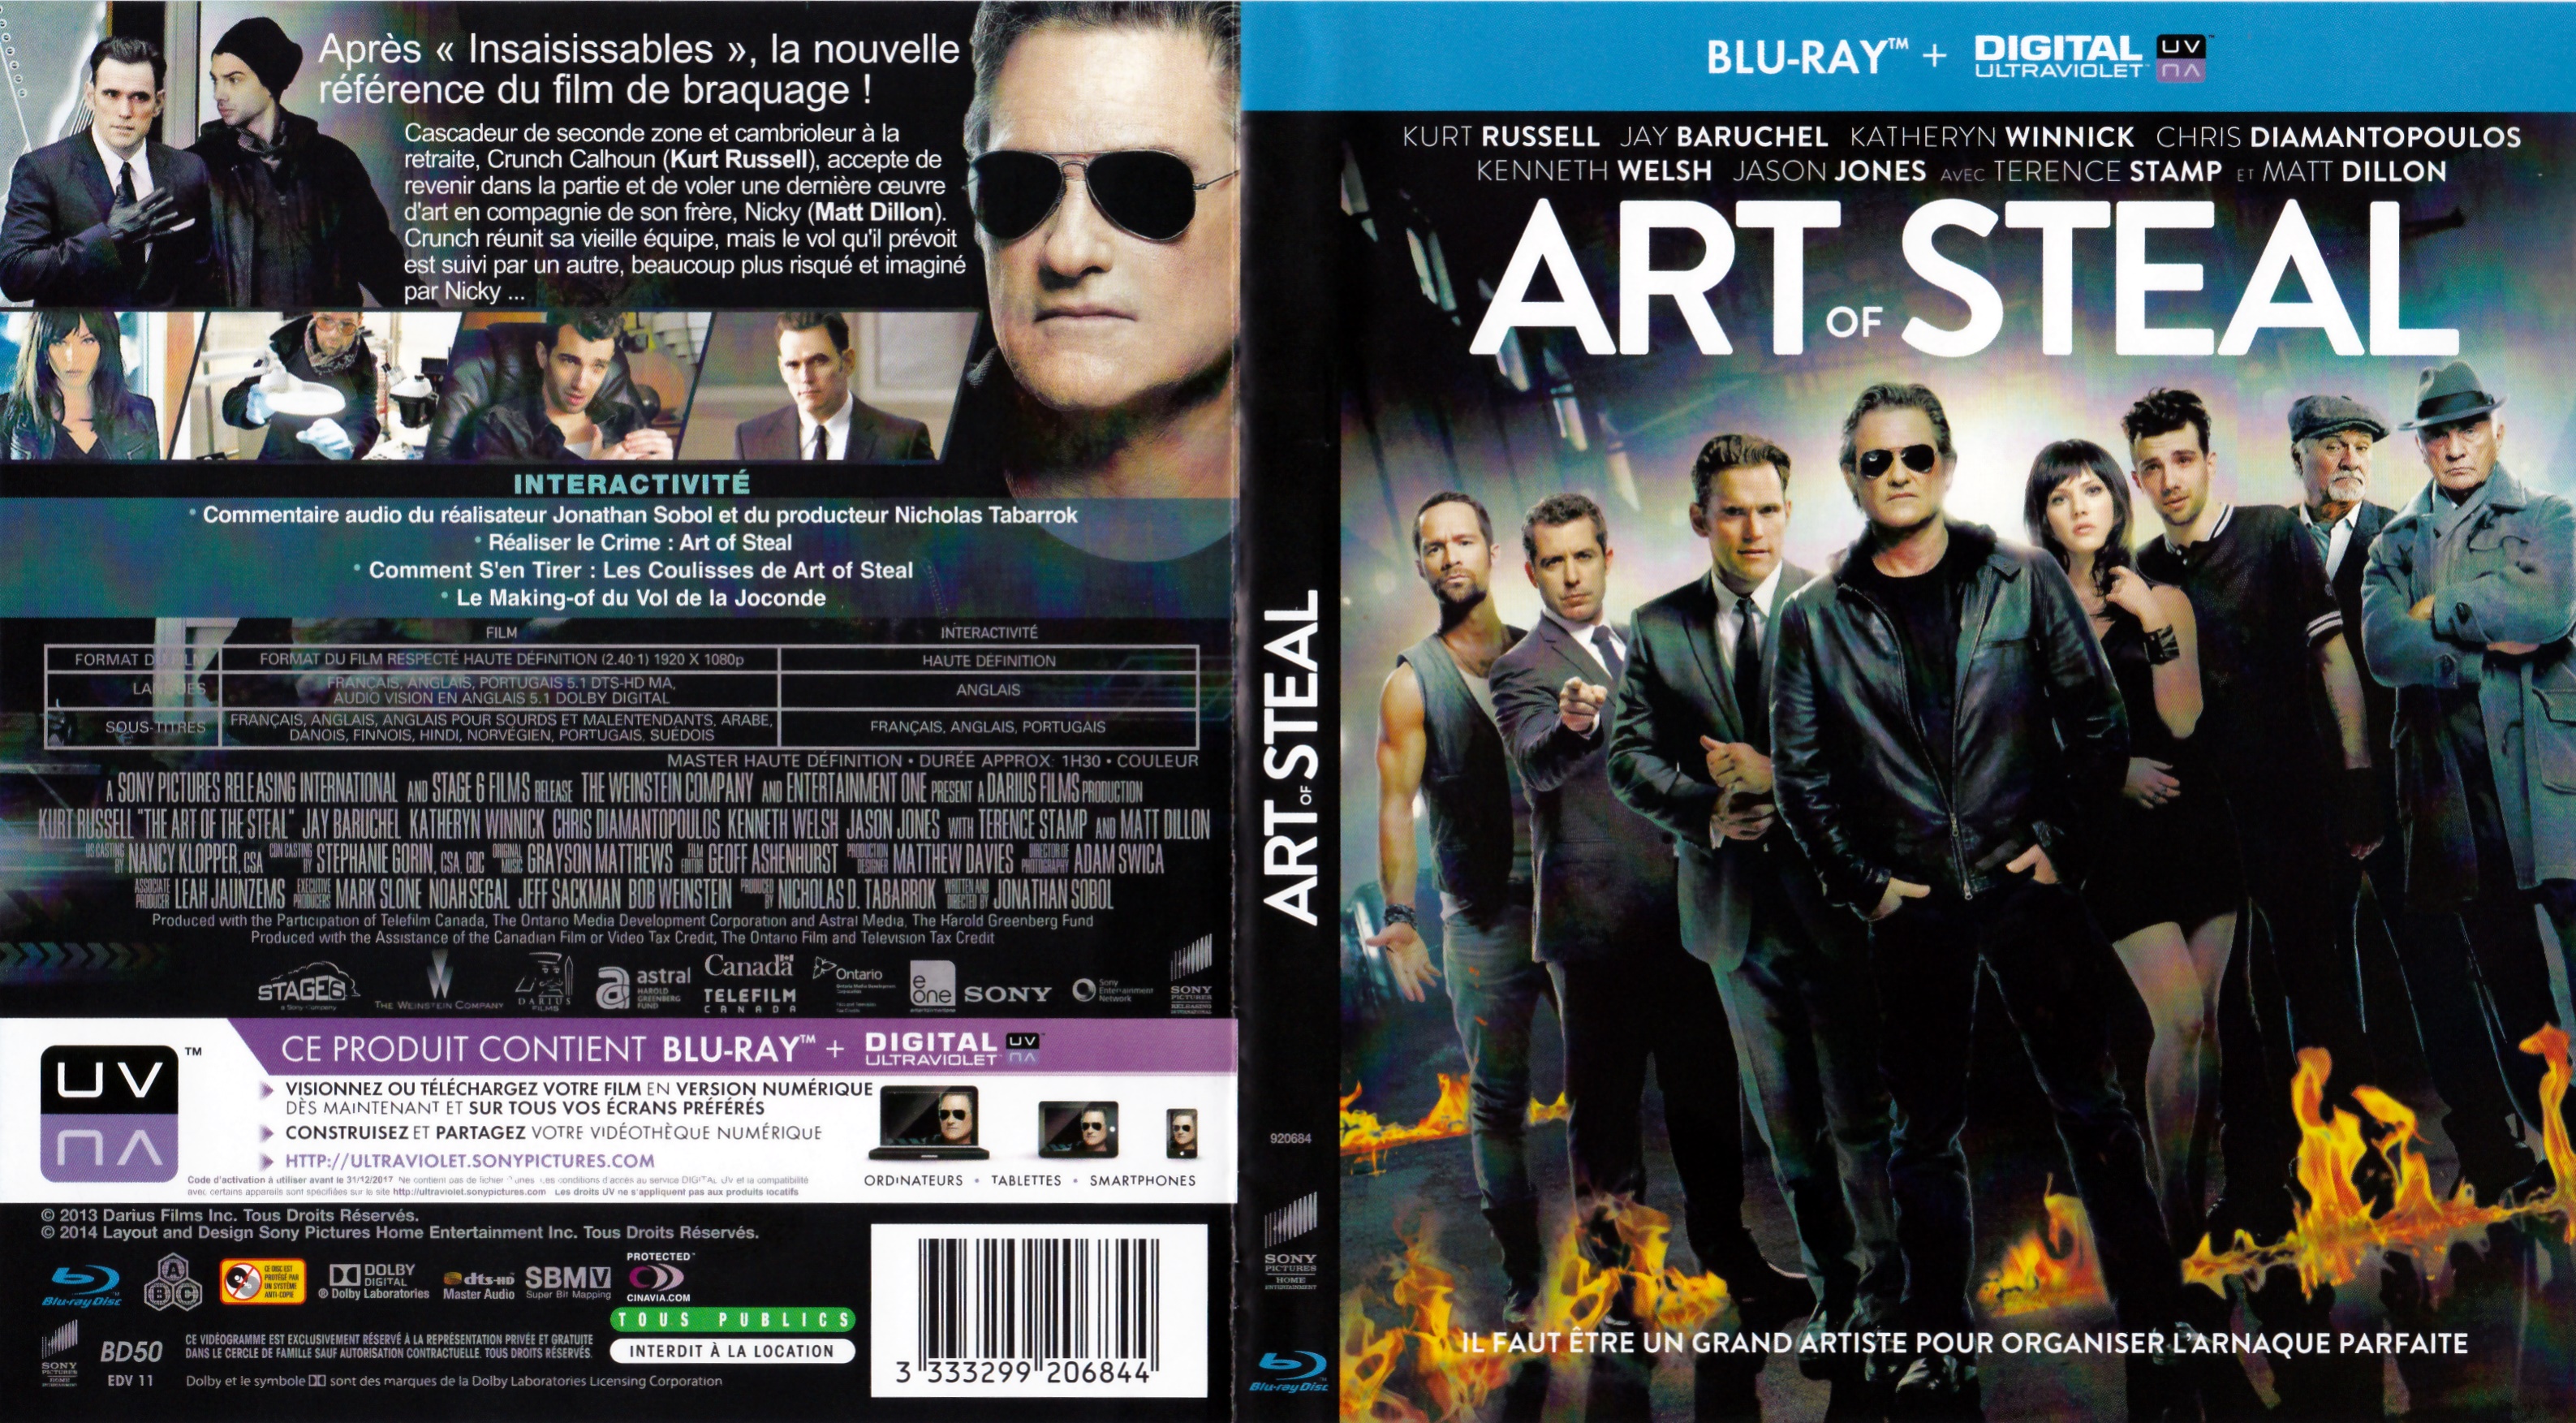 Jaquette DVD Art of steal (BLU-RAY)